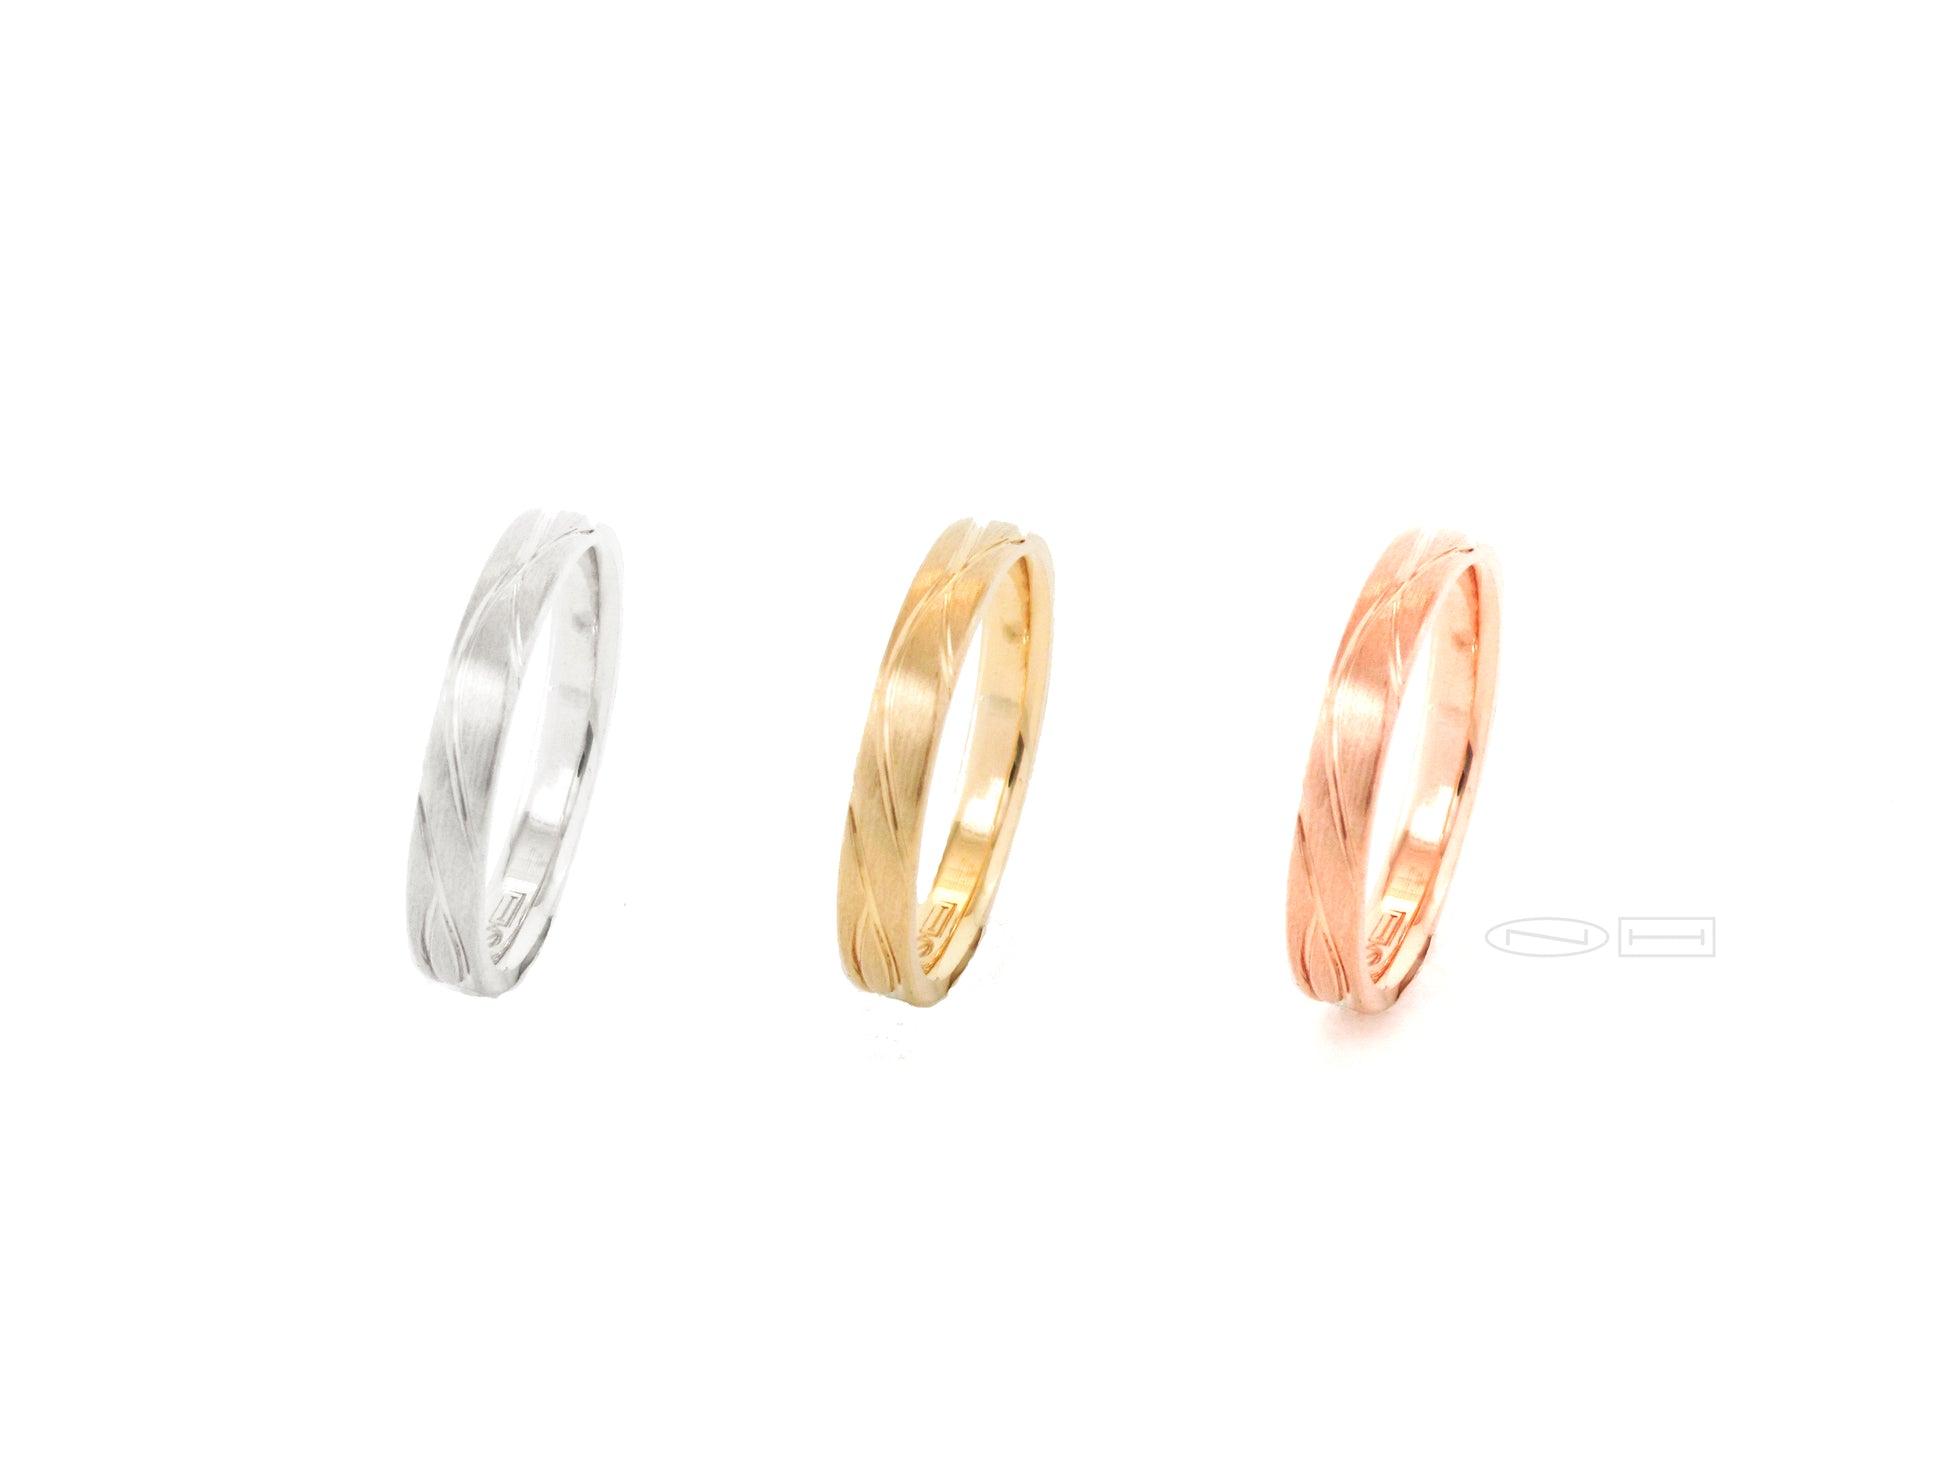 Organically you 3mm hand carved, comfort fit gold stacker. Matte finish with high polish carving and interior  Available in 18kt, or 14kt yellow, white, or red gold and platinum. 